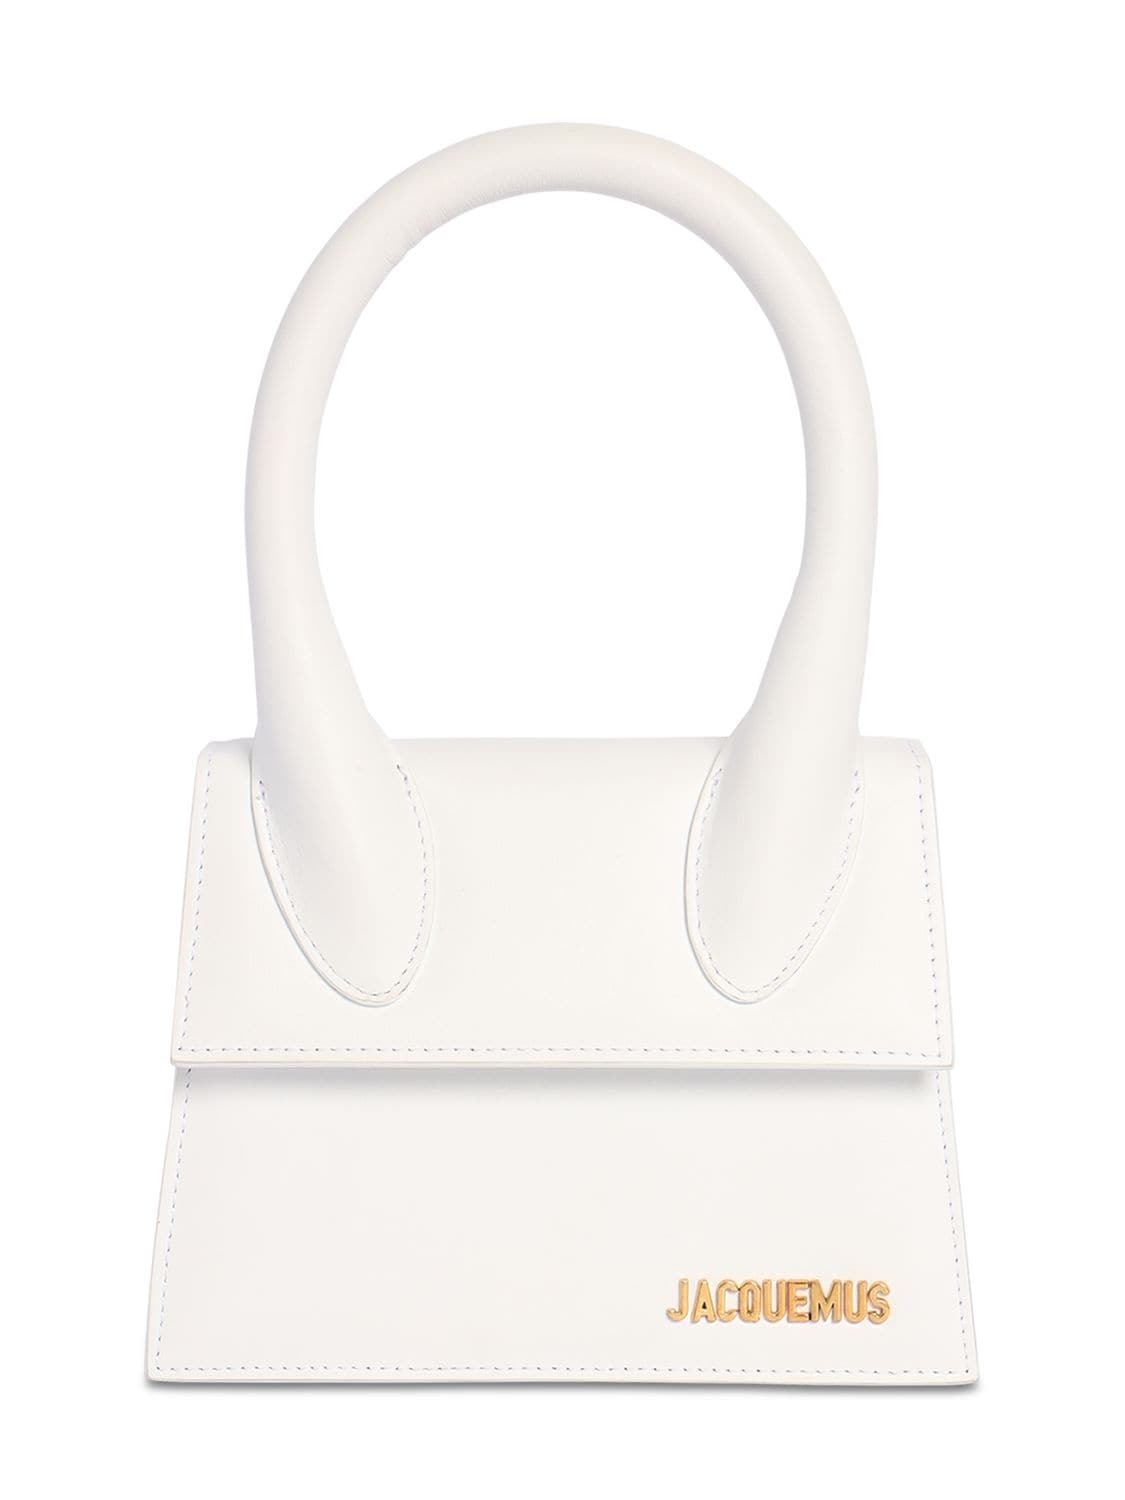 JACQUEMUS Le Chiquito Moyen Leather Bag in white